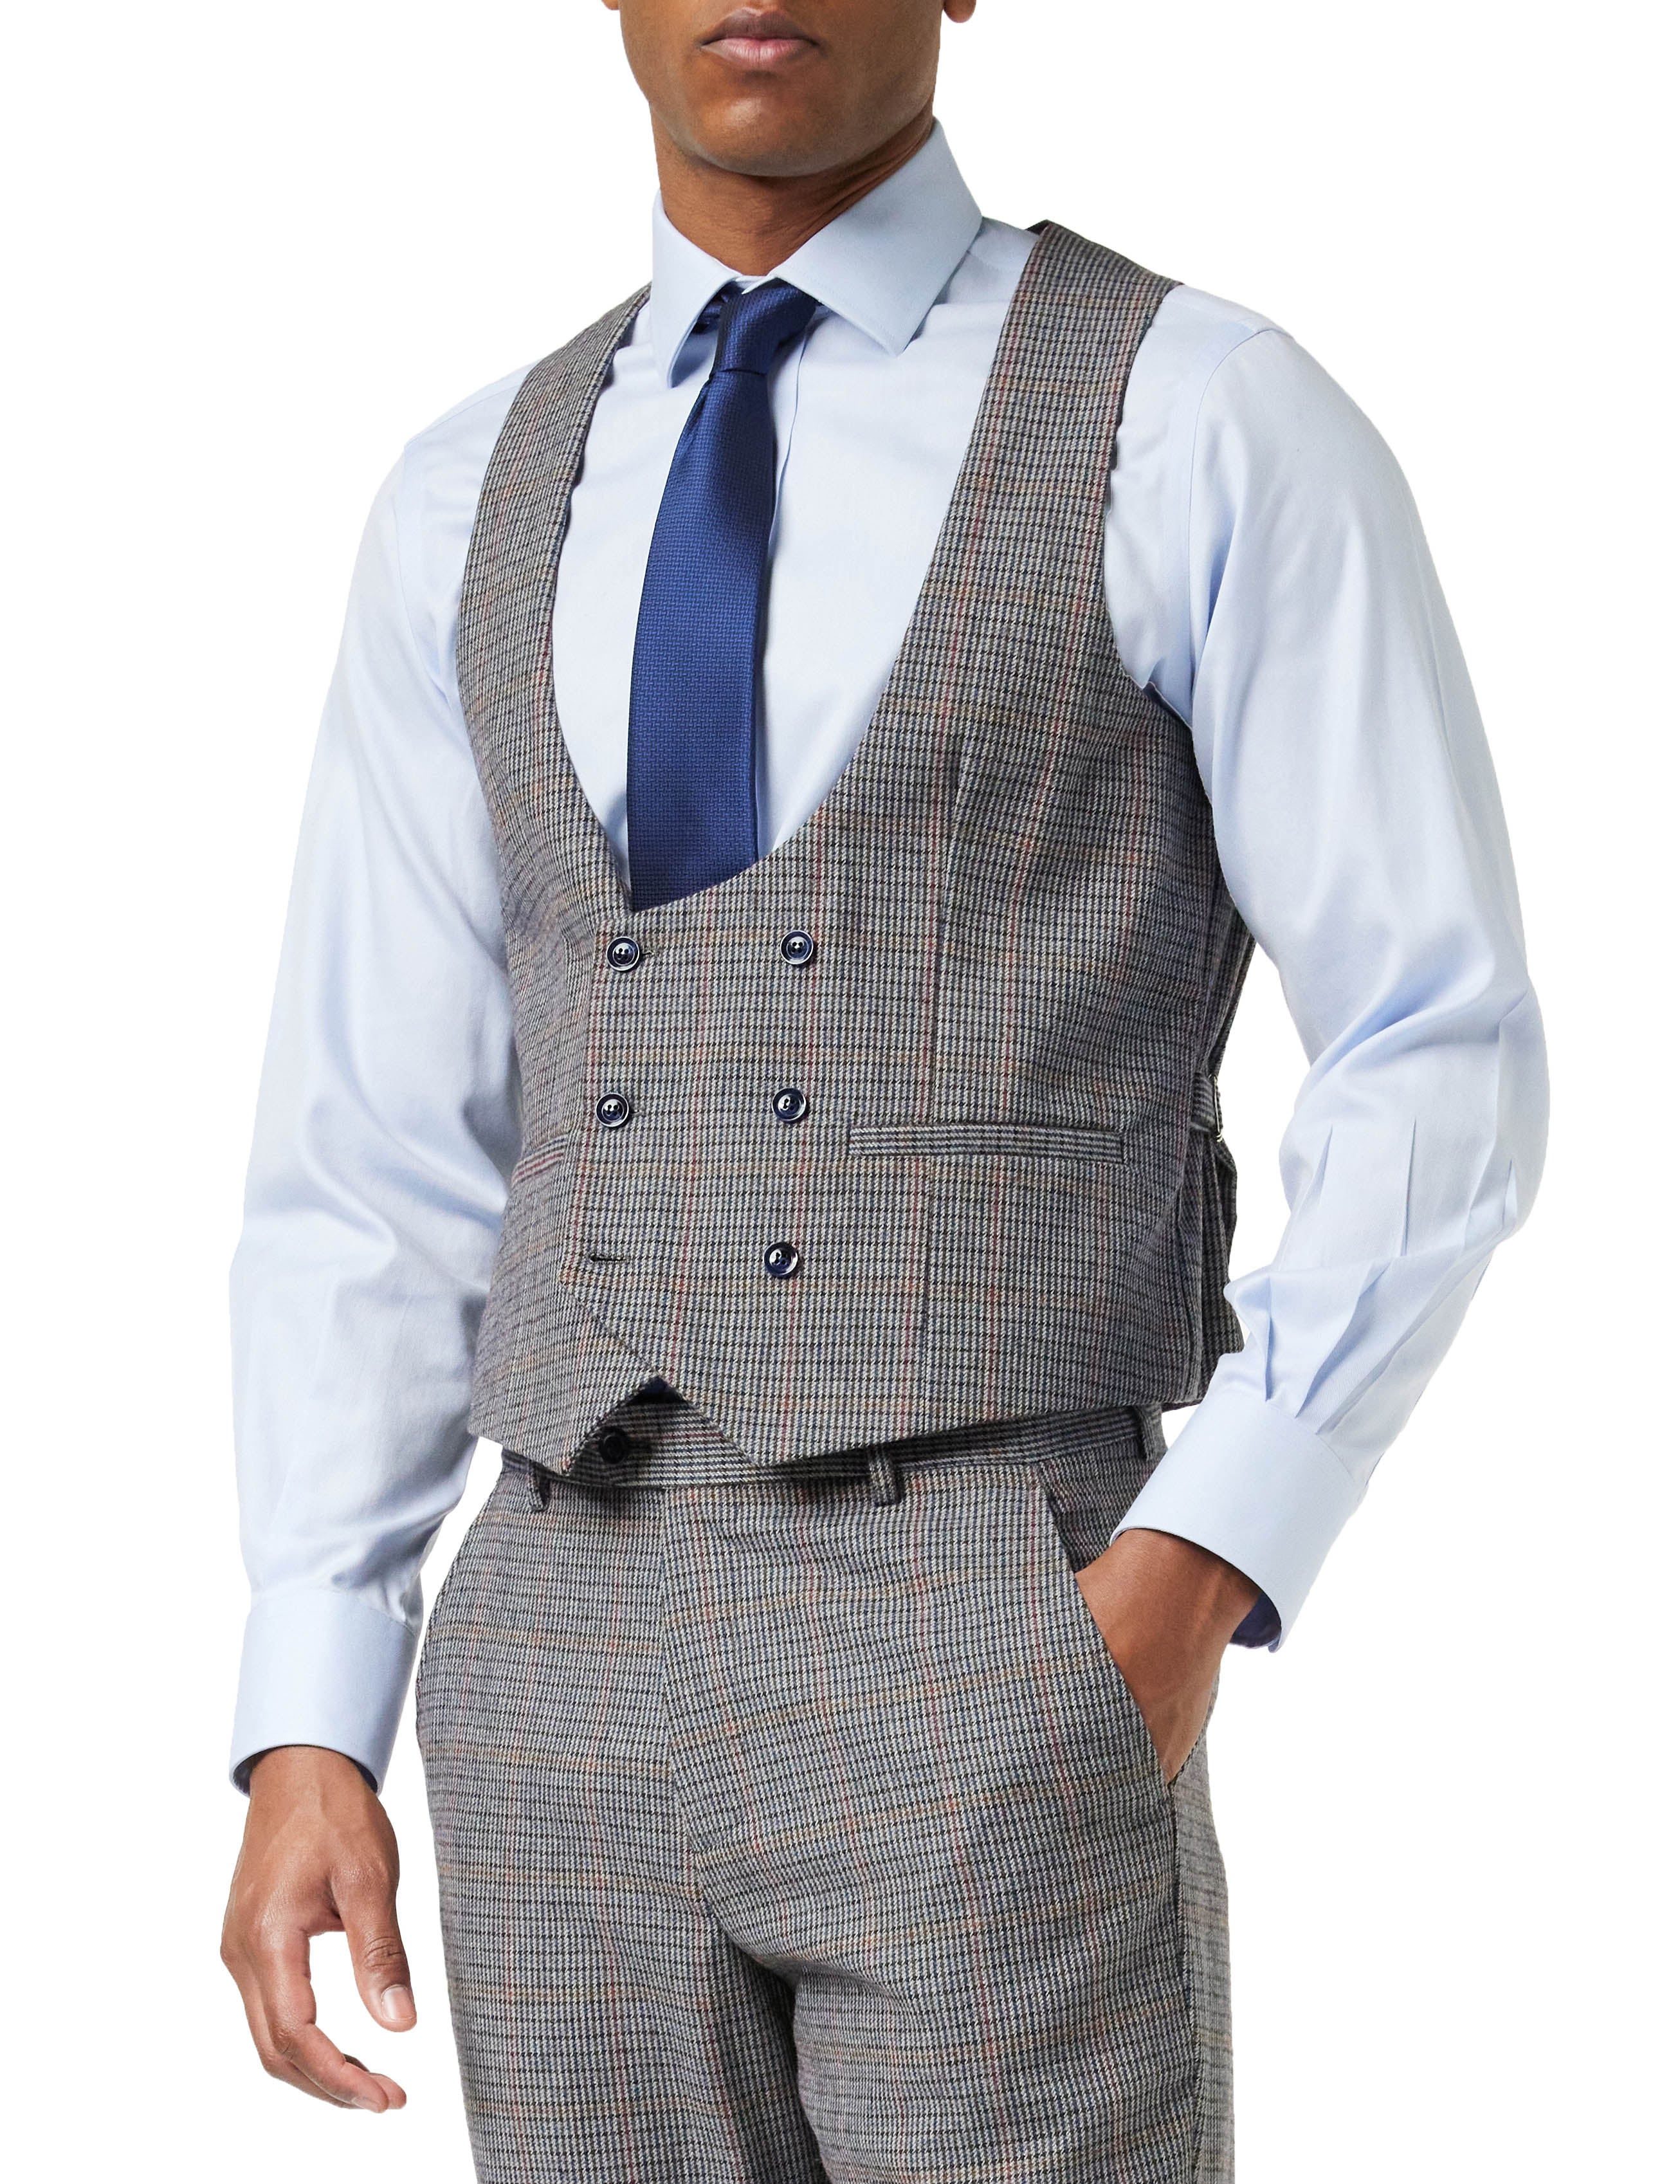 HERVE - BLUE HOUNDSTOOTH TWEED DOUBLE BREASTED WAISTCOAT